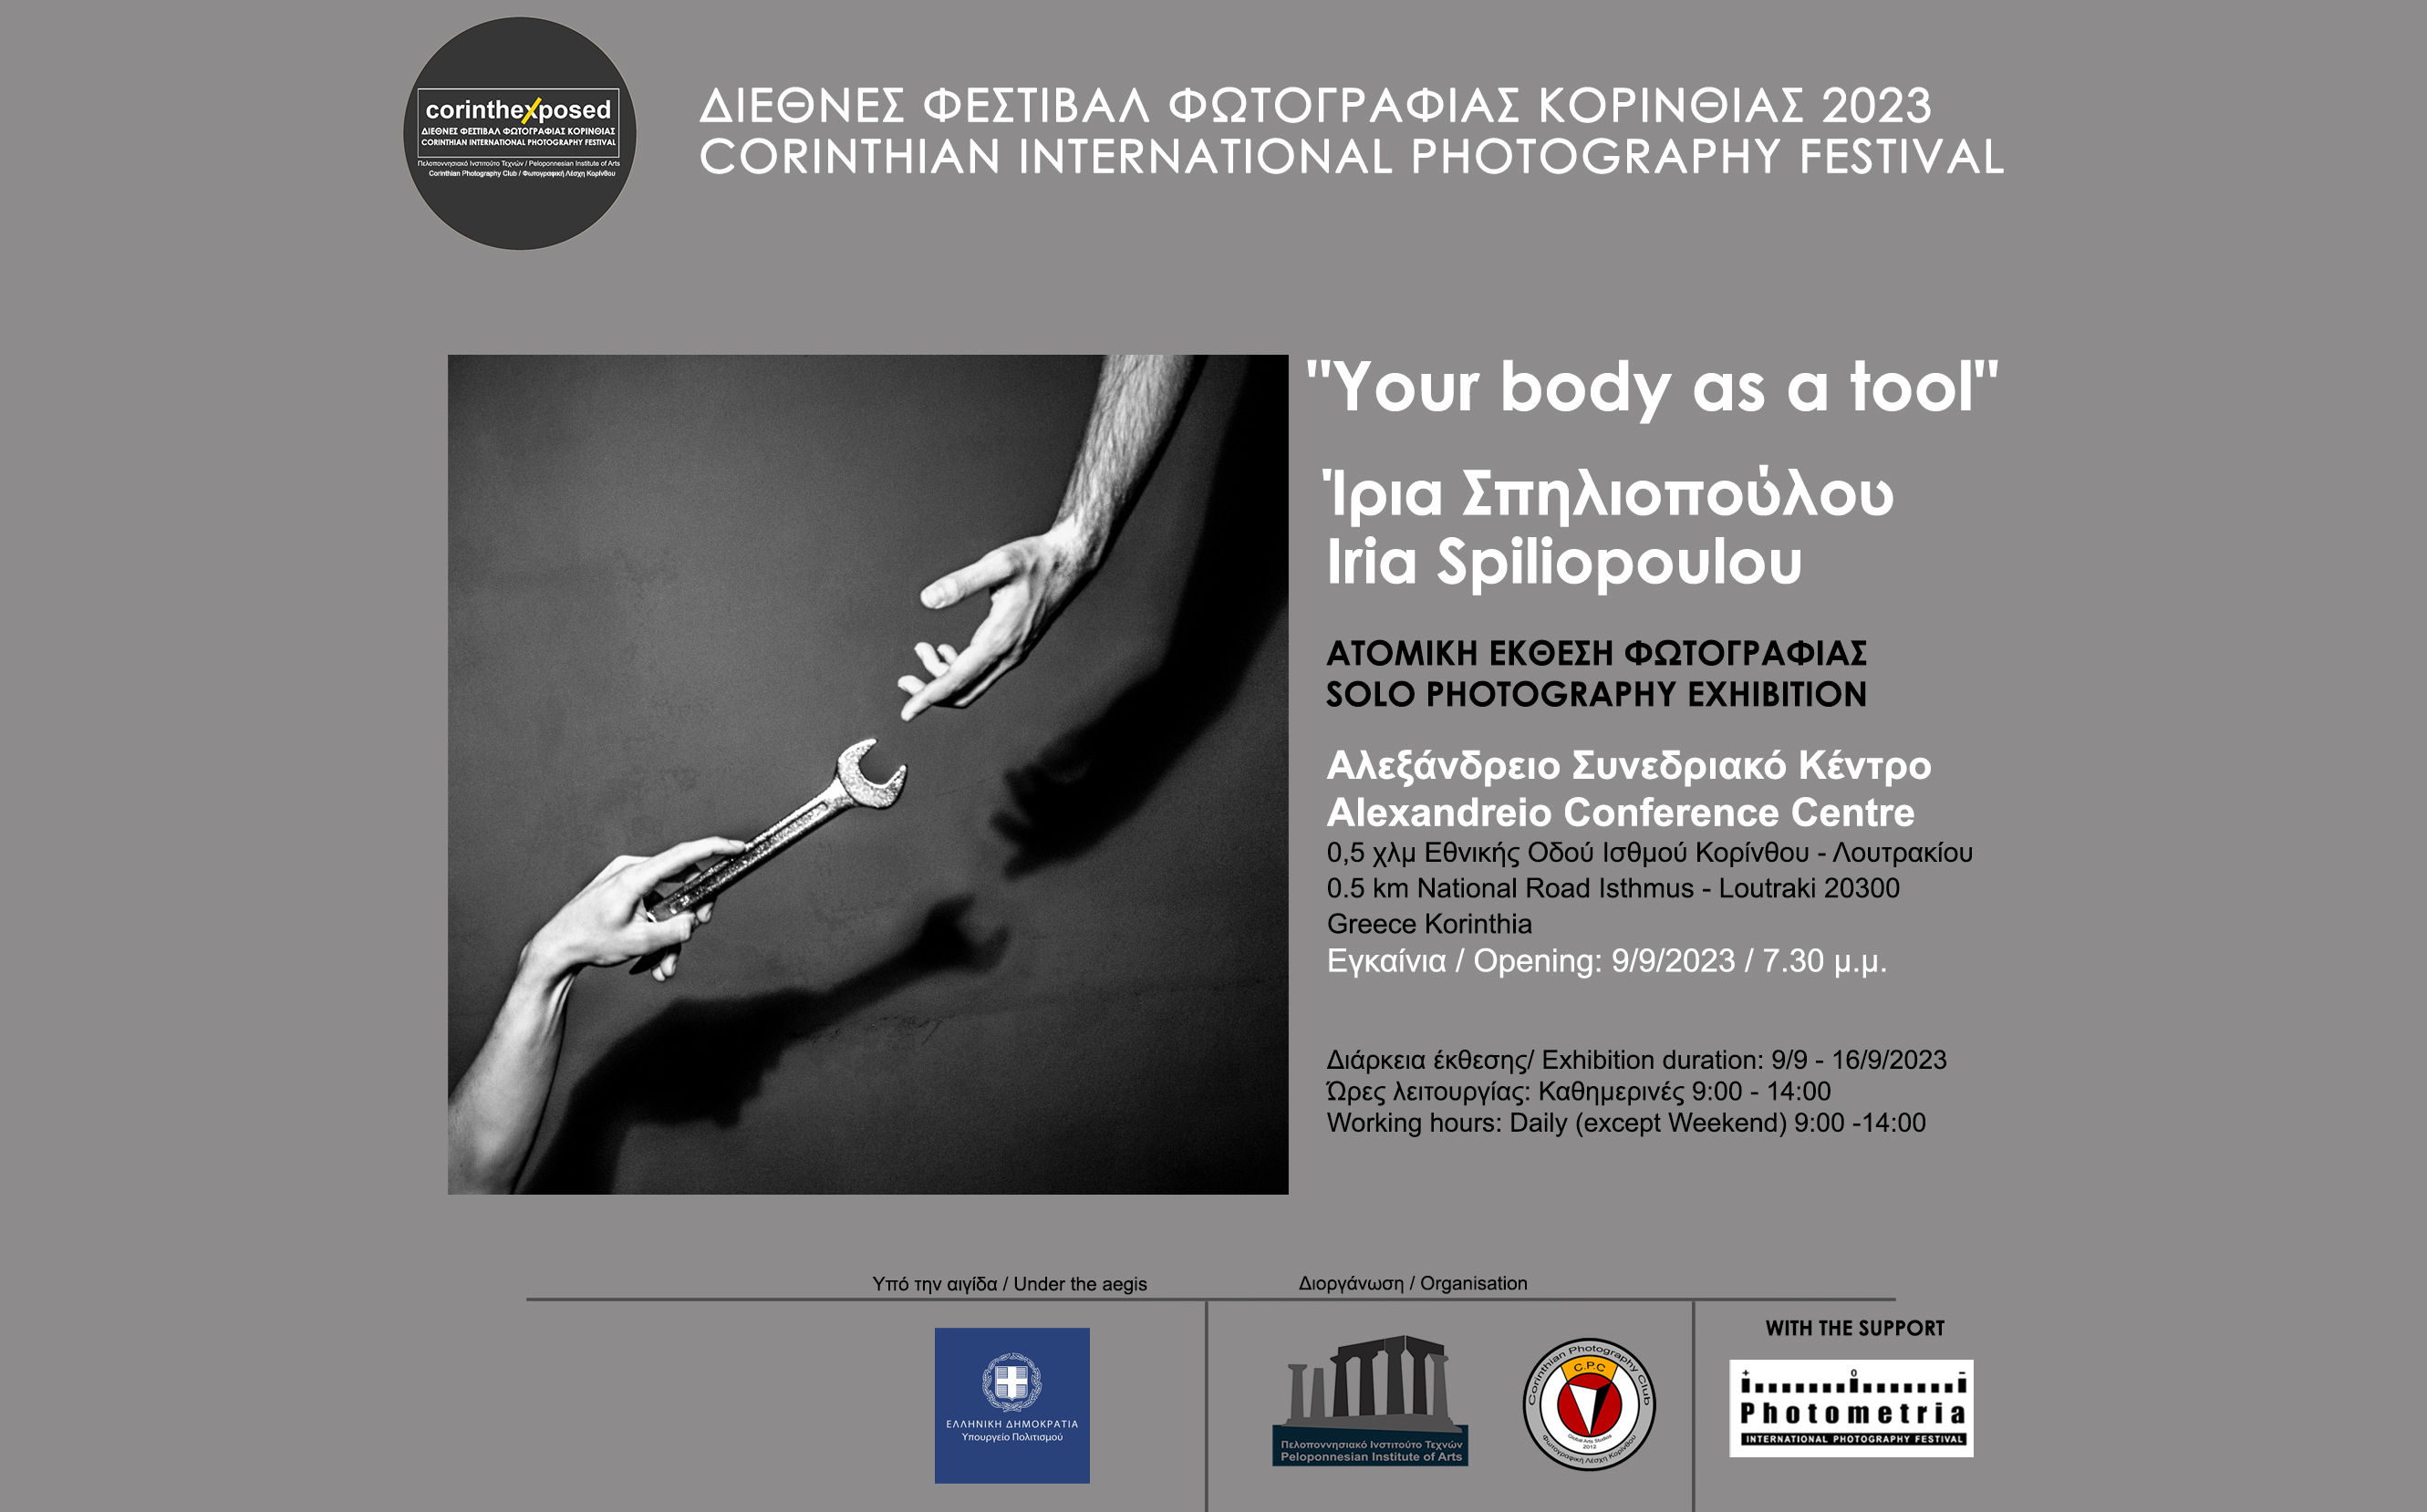 "Your body as a tool" photography exhibition by Iria Spiliopoulou